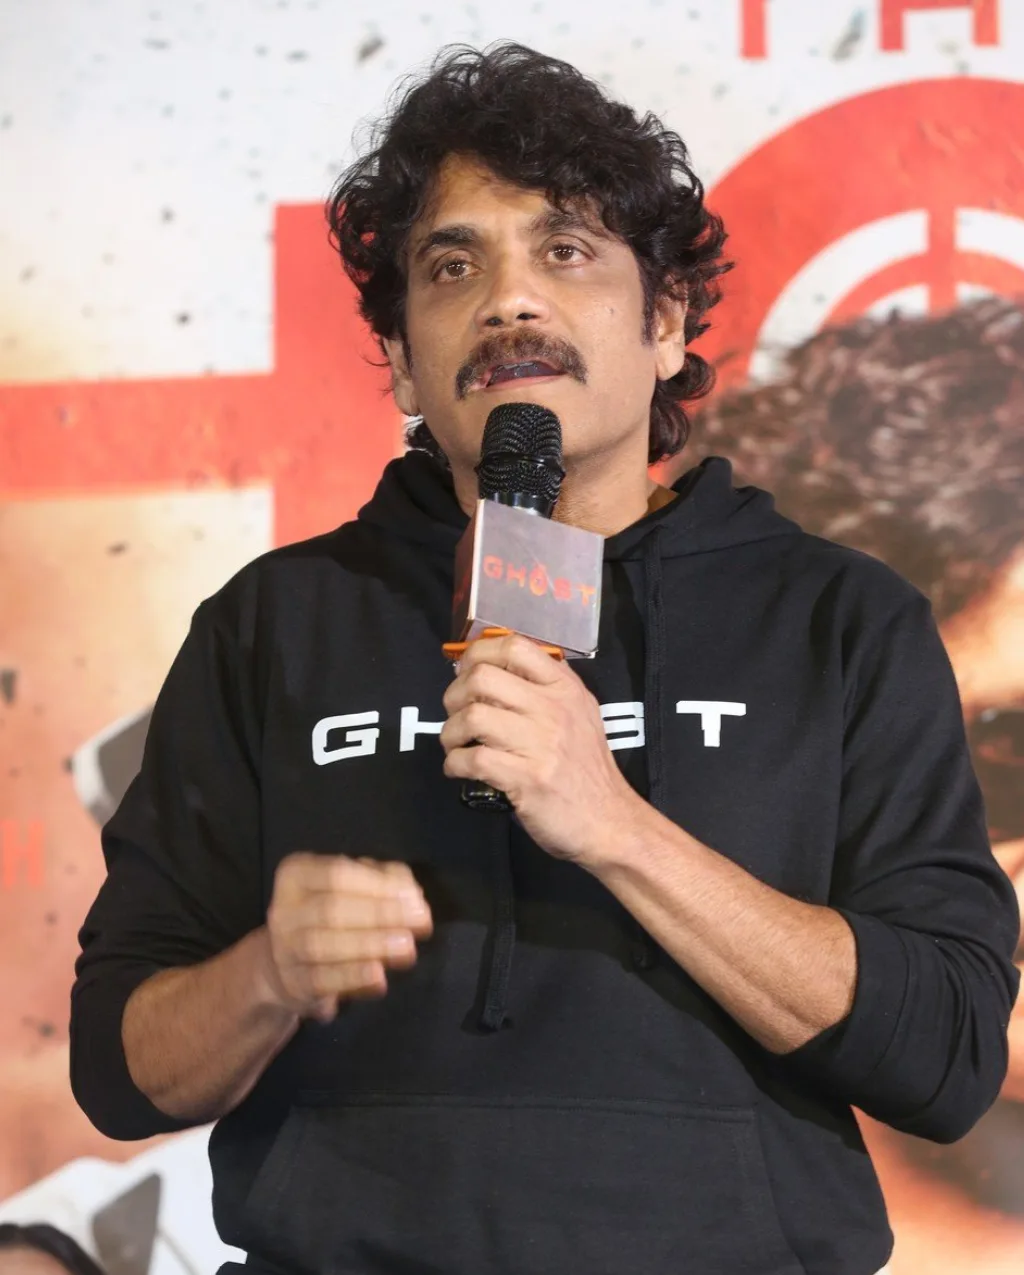 Nagarjuna The Ghost Release Trailer Launch Event